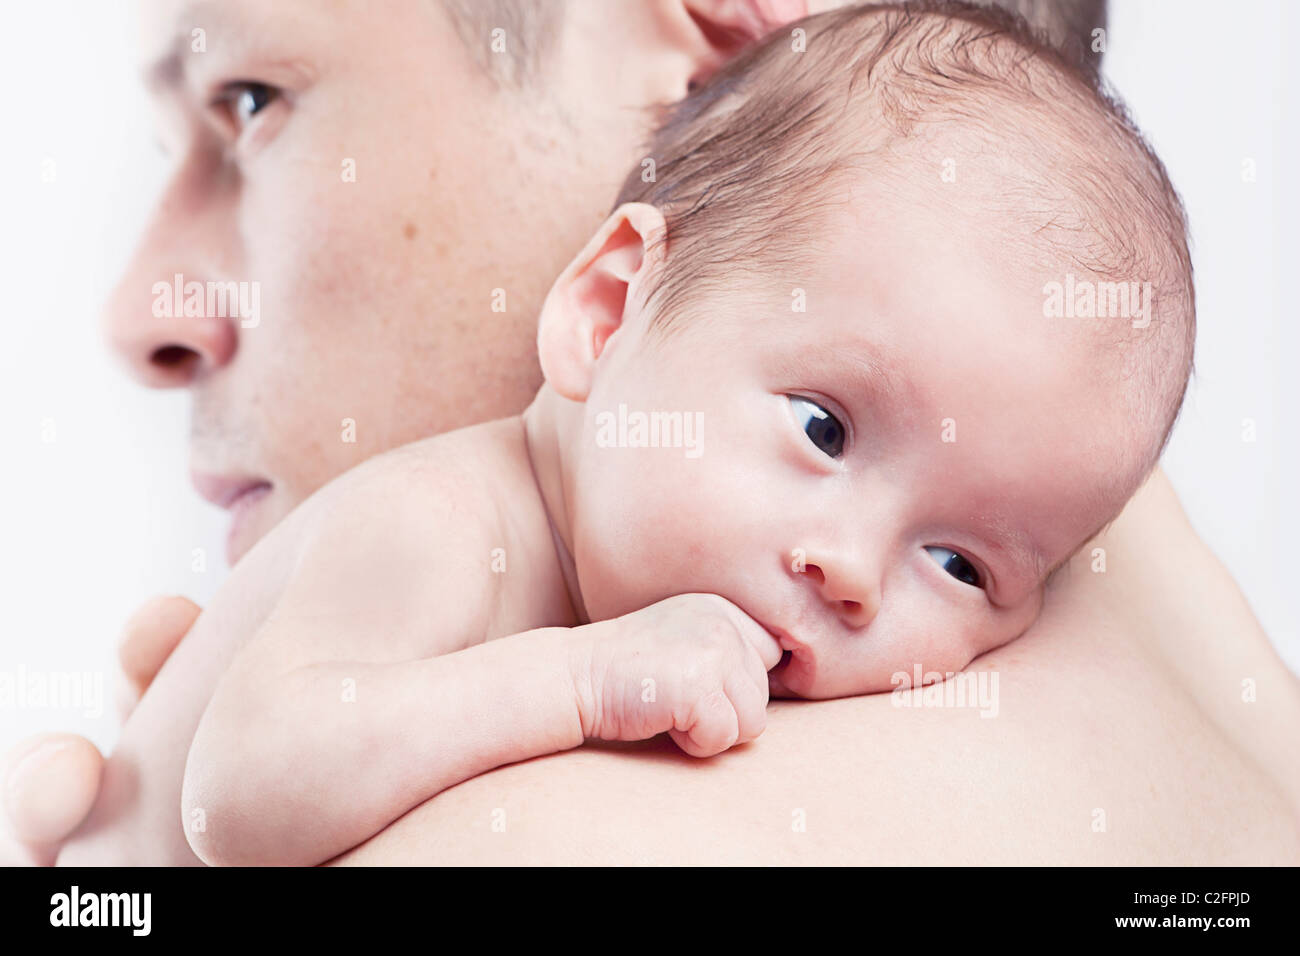 baby resting on father's shoulder Stock Photo